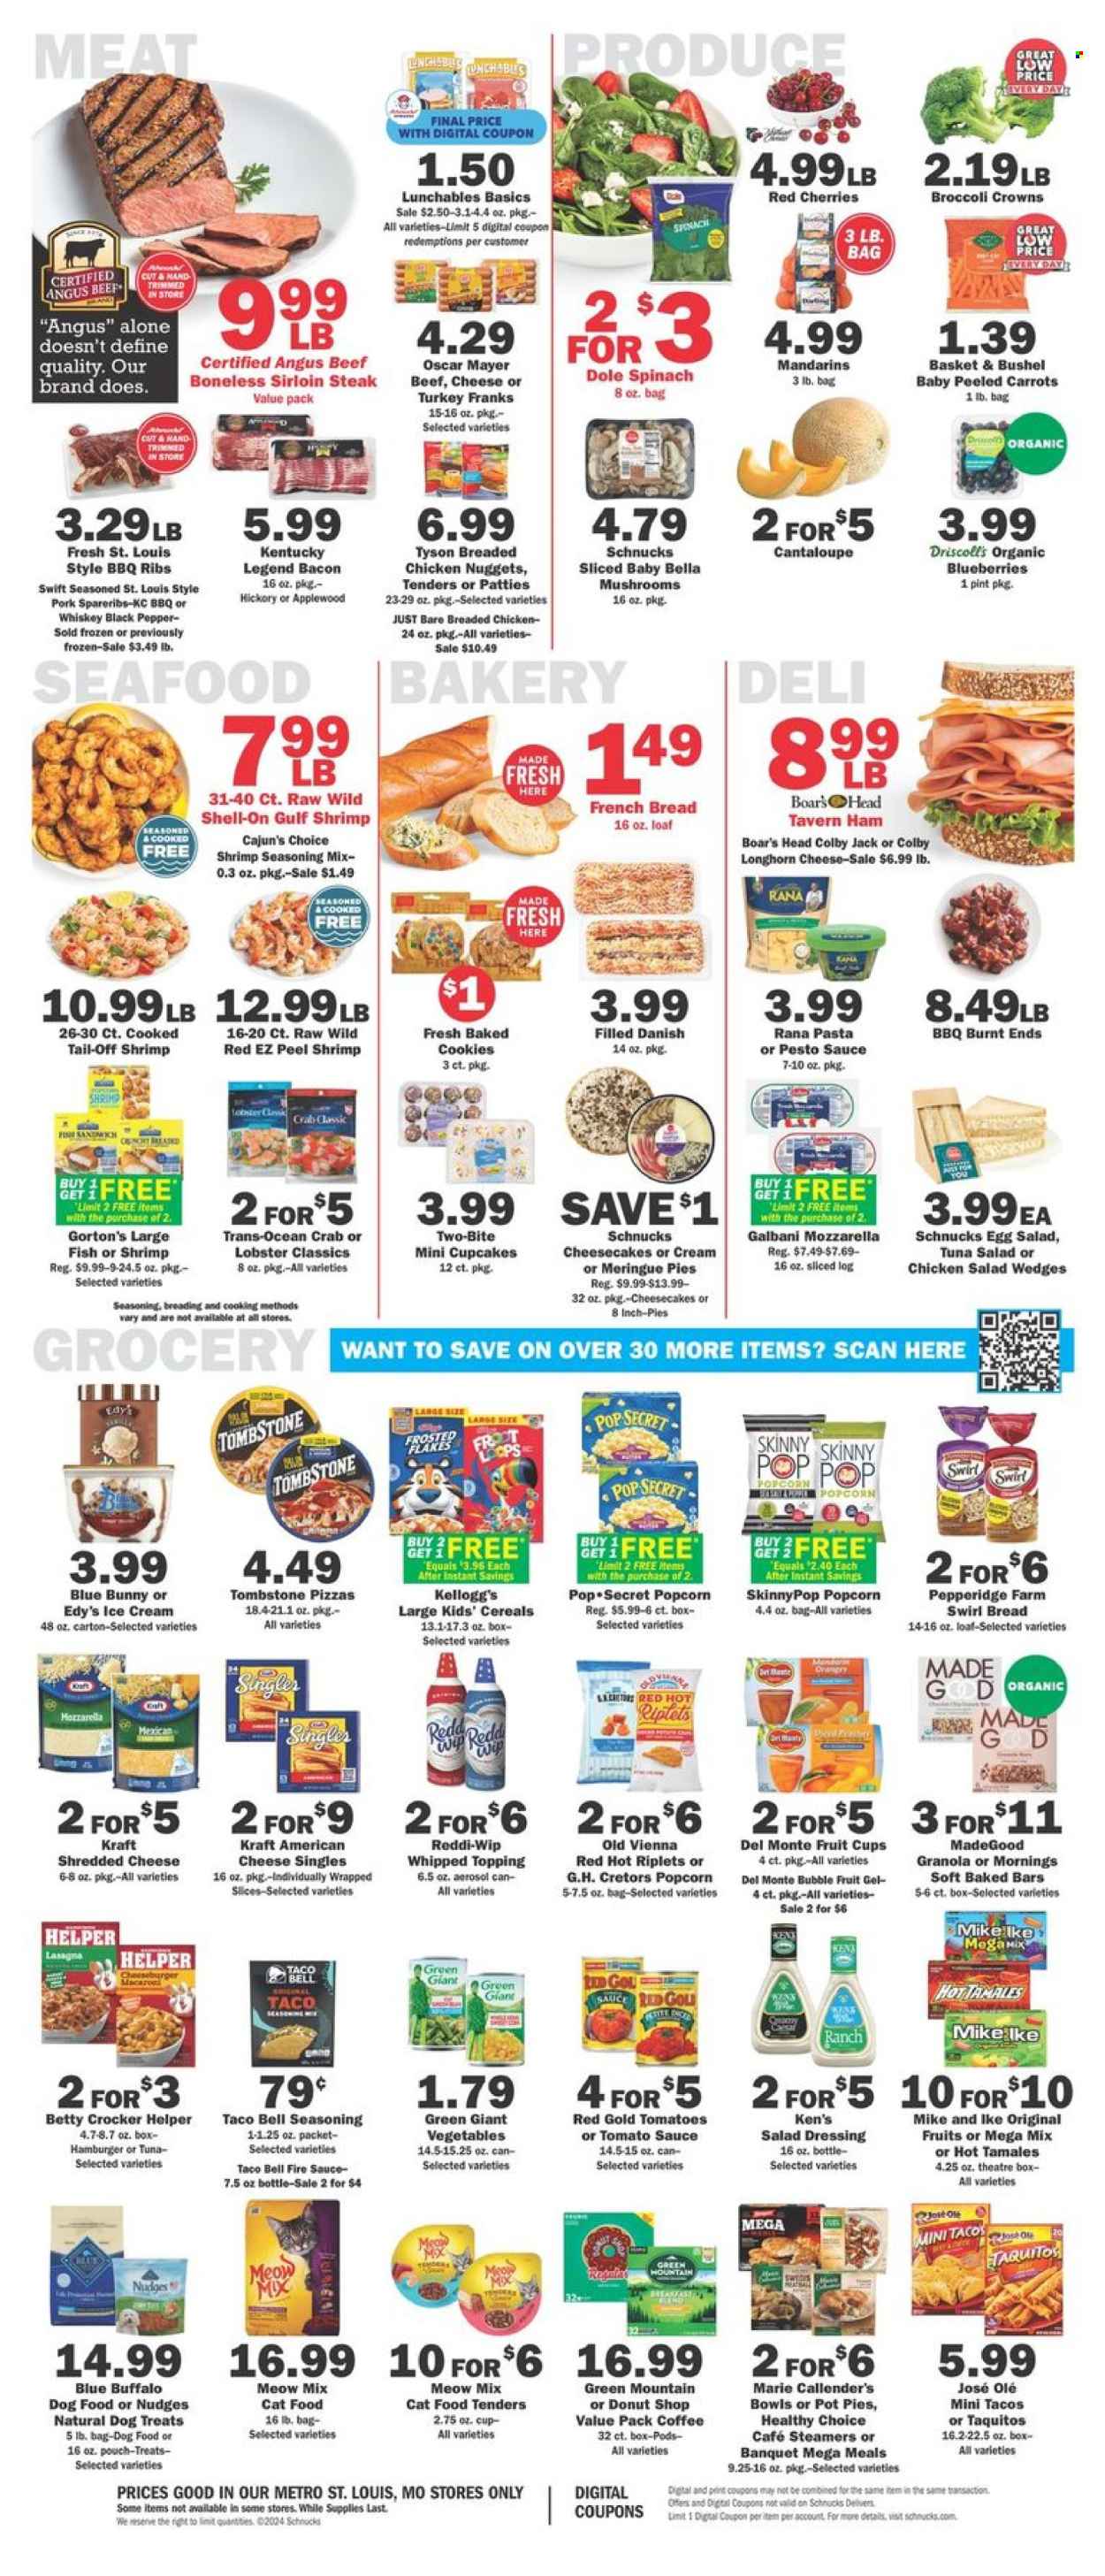 thumbnail - Schnucks Flyer - 07/24/2024 - 07/30/2024 - Sales products - mushrooms, baby bella mushrooms, bread, pie, french bread, cupcake, pot pie, cheesecake, macaroons, broccoli, cantaloupe, carrots, spinach, Dole, mandarines, fruit cup, melons, lobster, crab, shrimps, Gorton's, pizza, nuggets, hamburger, cheeseburger, chicken nuggets, lasagna meal, Healthy Choice, Marie Callender's, taquitos, Lunchables, Kraft®, chicken salad, Rana, Boar's Head, ready meal, breaded chicken, Oscar Mayer, frankfurters, tuna salad, meat salad, Colby cheese, Longhorn cheese, mozzarella, shredded cheese, cheese, Galbani, Blue Bunny, Kellogg's, popcorn, Skinny Pop, topping, canned tomatoes, tomato sauce, Del Monte, cereals, granola, Frosted Flakes, black pepper, seasoning, salad dressing, taco sauce, pesto, dressing, Green Mountain, beef meat, beef sirloin, beef steak, steak, sirloin steak, ribs, pork meat, pork ribs, pork spare ribs, marinated pork, animal food, animal treats, Blue Buffalo, cat food, dog food, Meow Mix, dog treat. Page 4.